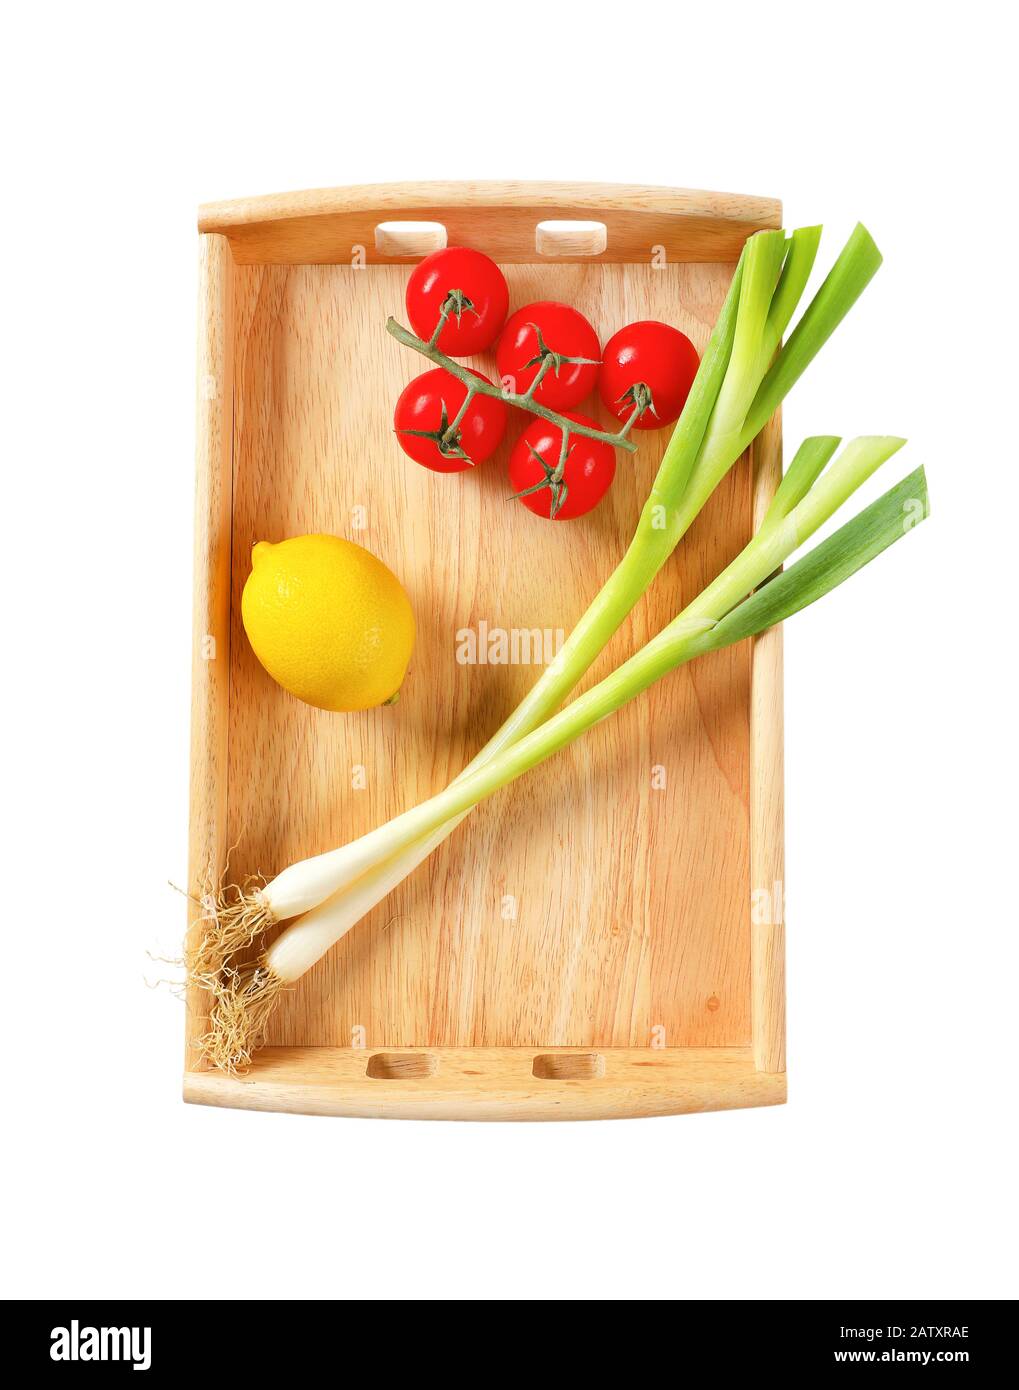 Spring onion, tomatoes and lemon on wooden serving tray isolated on white Stock Photo